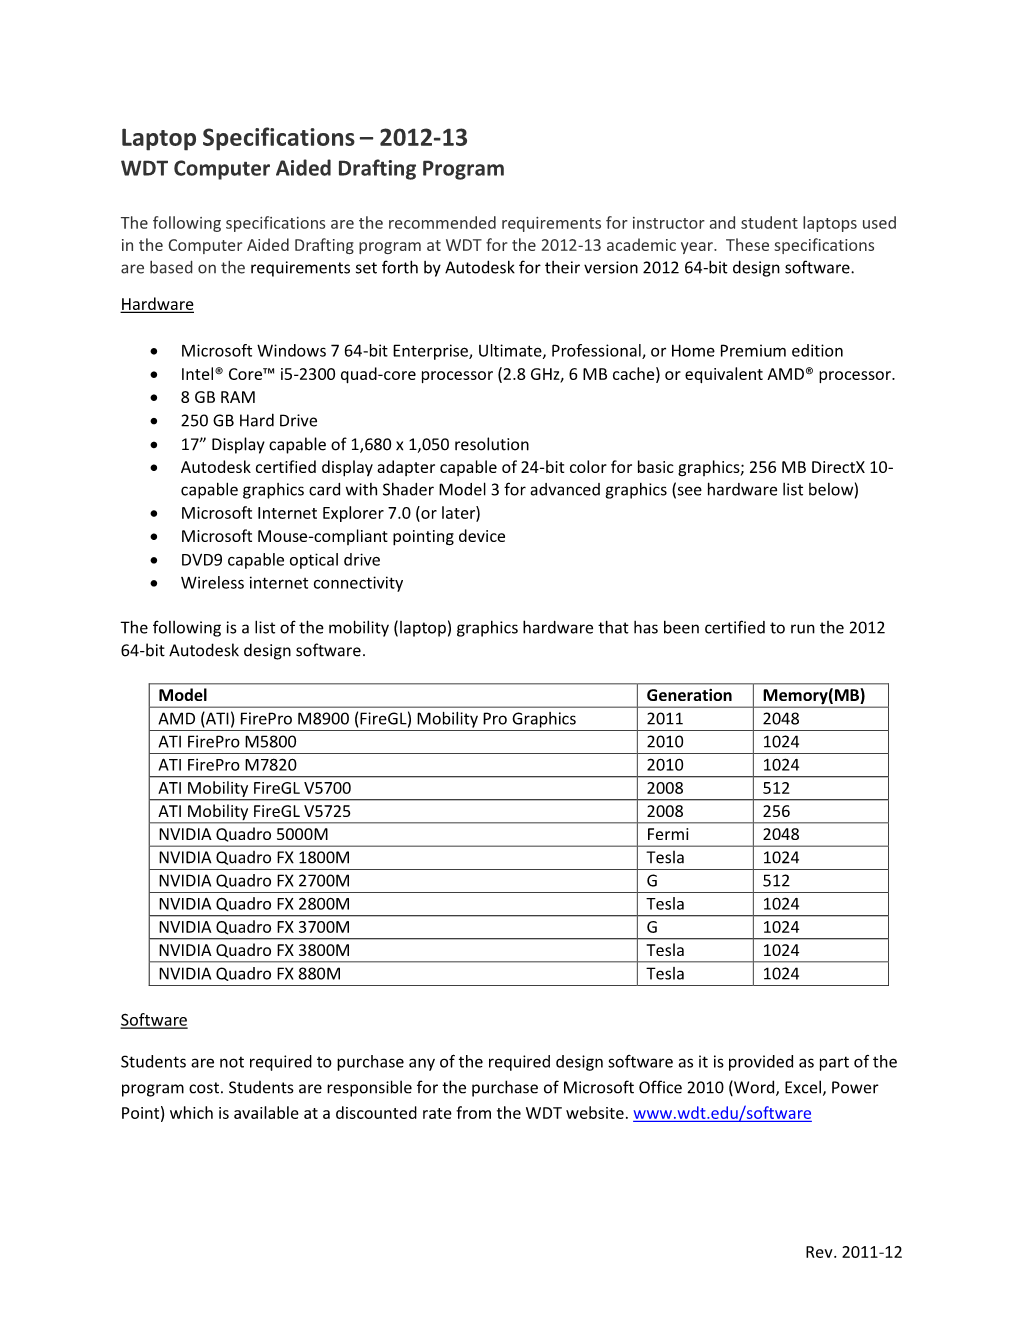 Laptop Specifications – 2012-13 WDT Computer Aided Drafting Program